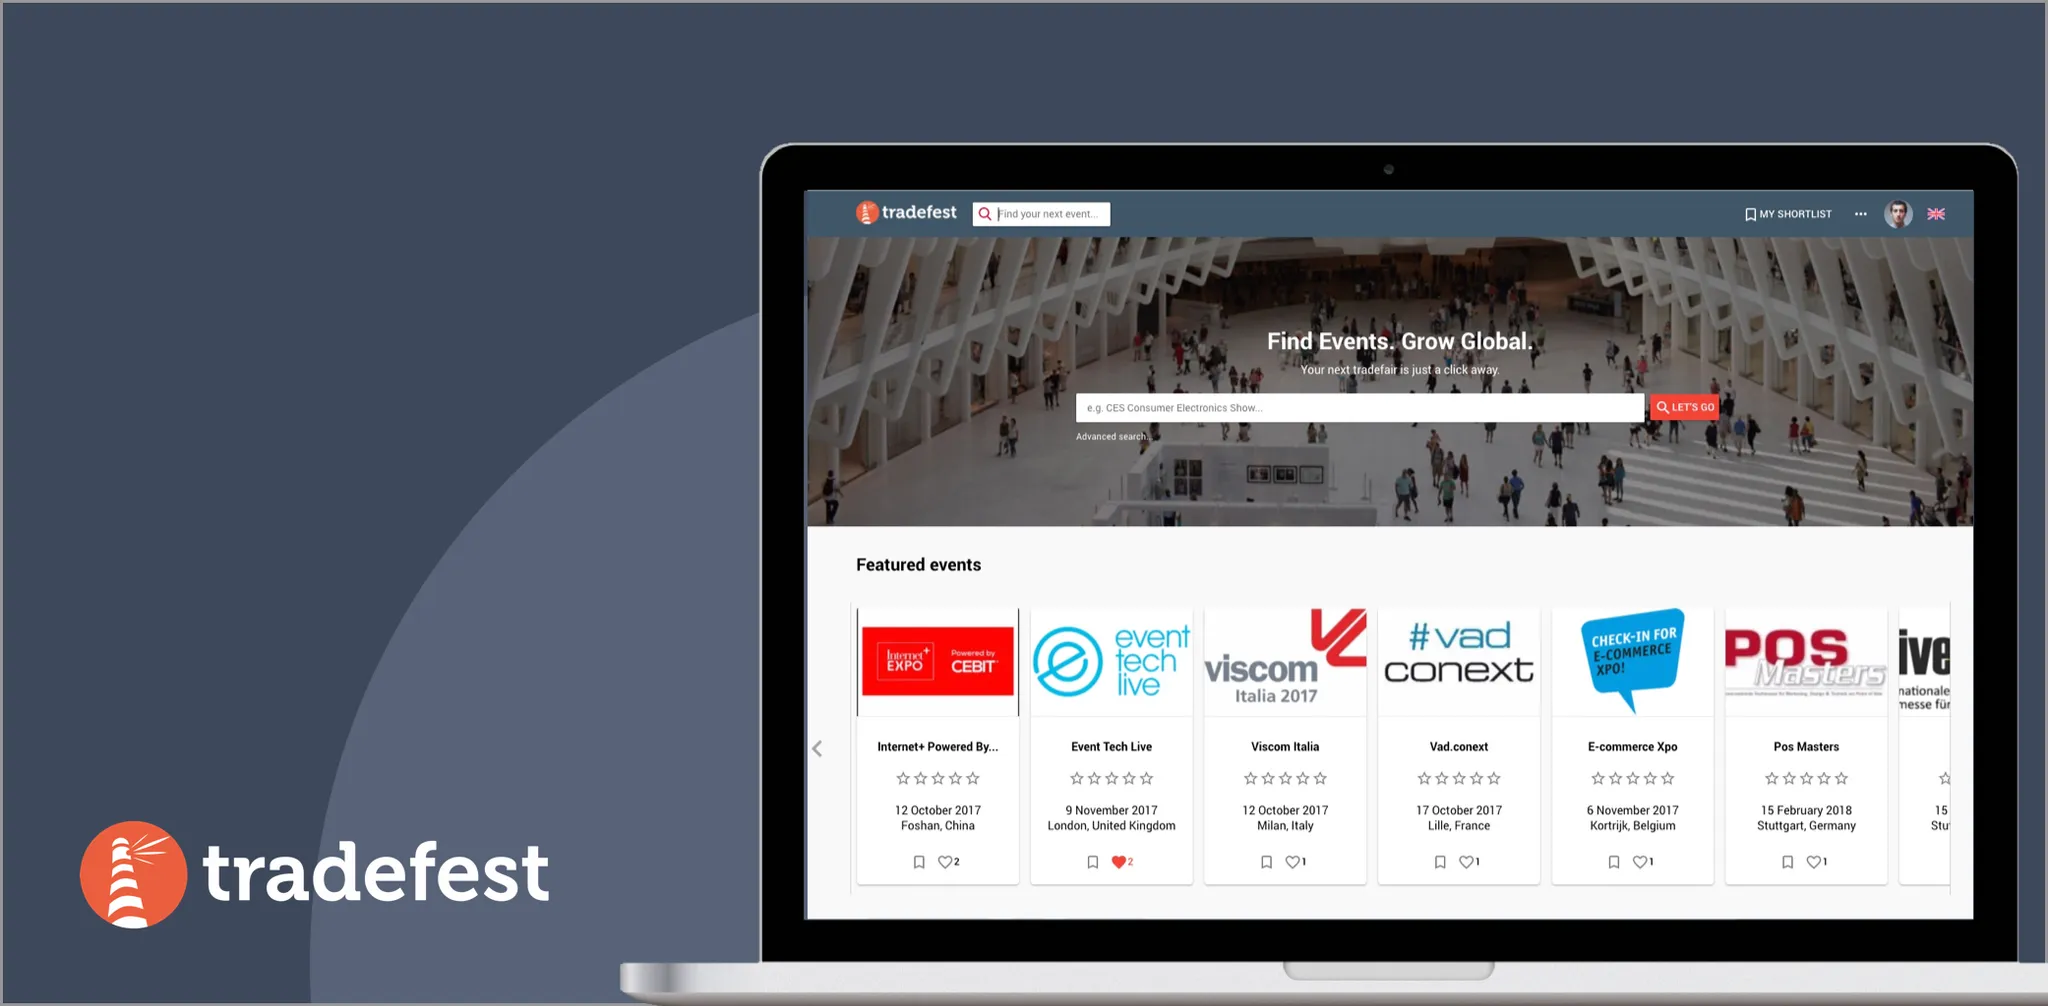 Tradefest is live, the events discovery platform for fairs and conferences